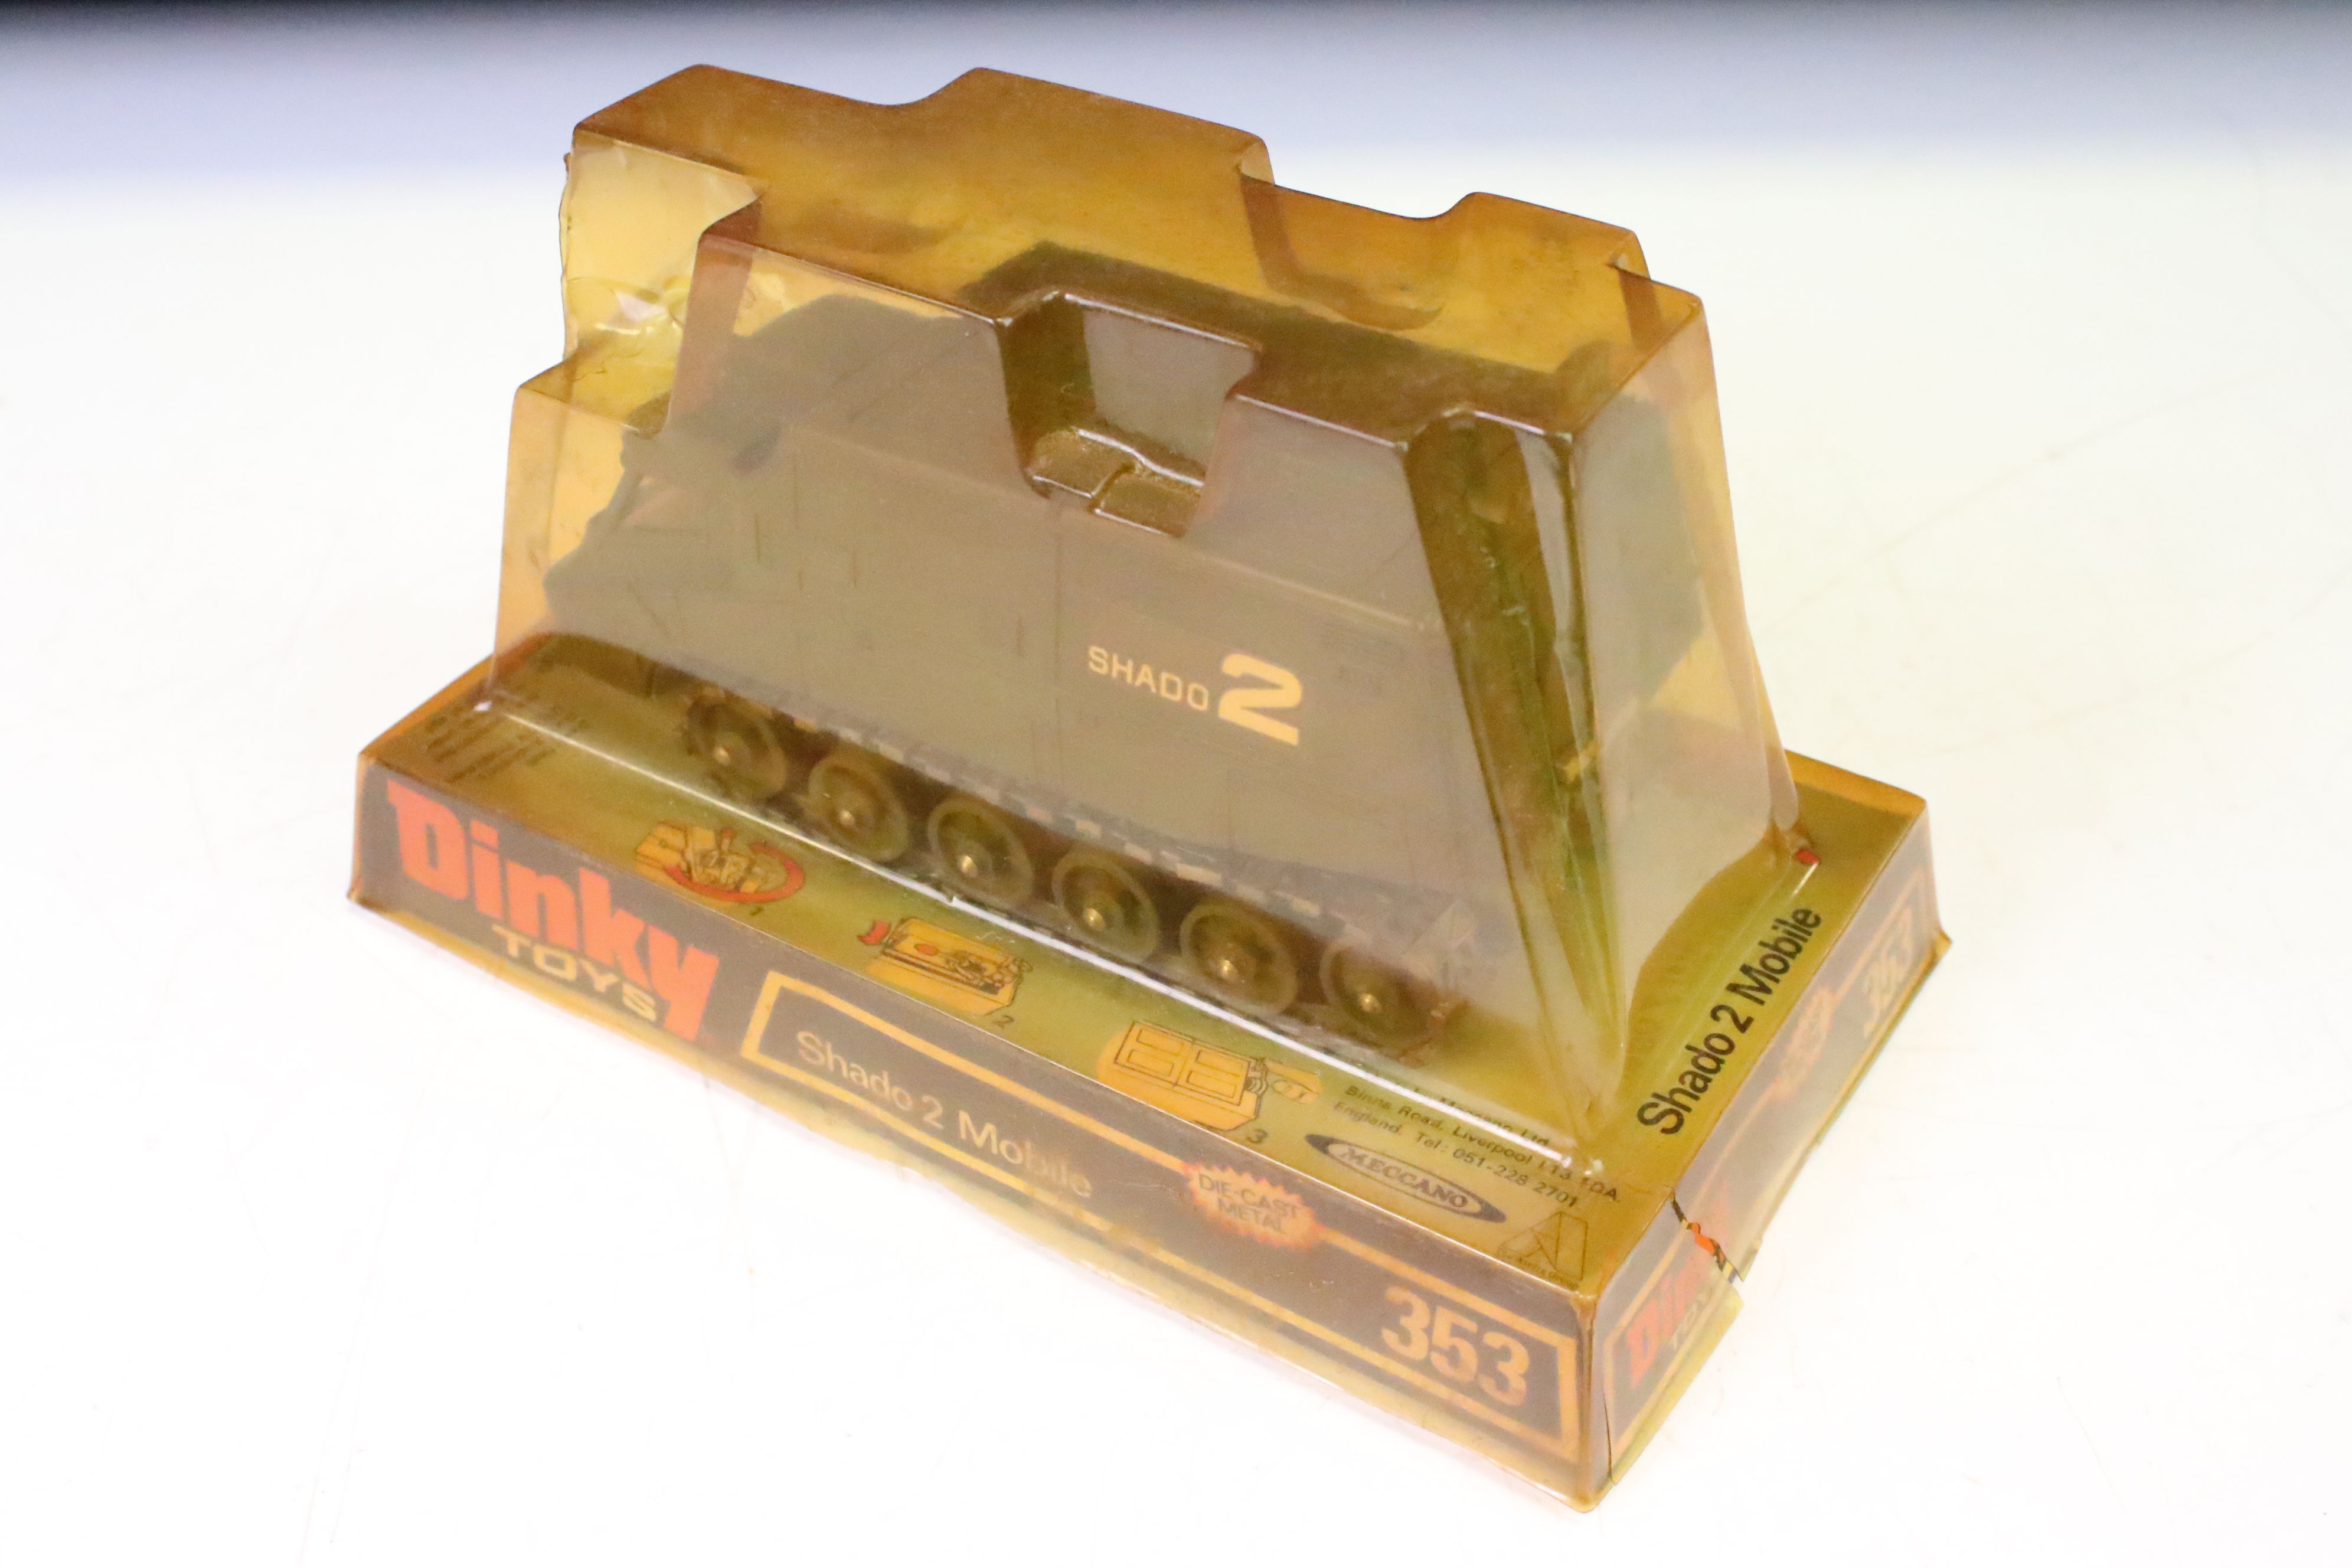 Boxed Dinky 353 Shado 2 Mobile diecast model, diecast ex, box lid showing discolouring and cracks to - Image 2 of 3